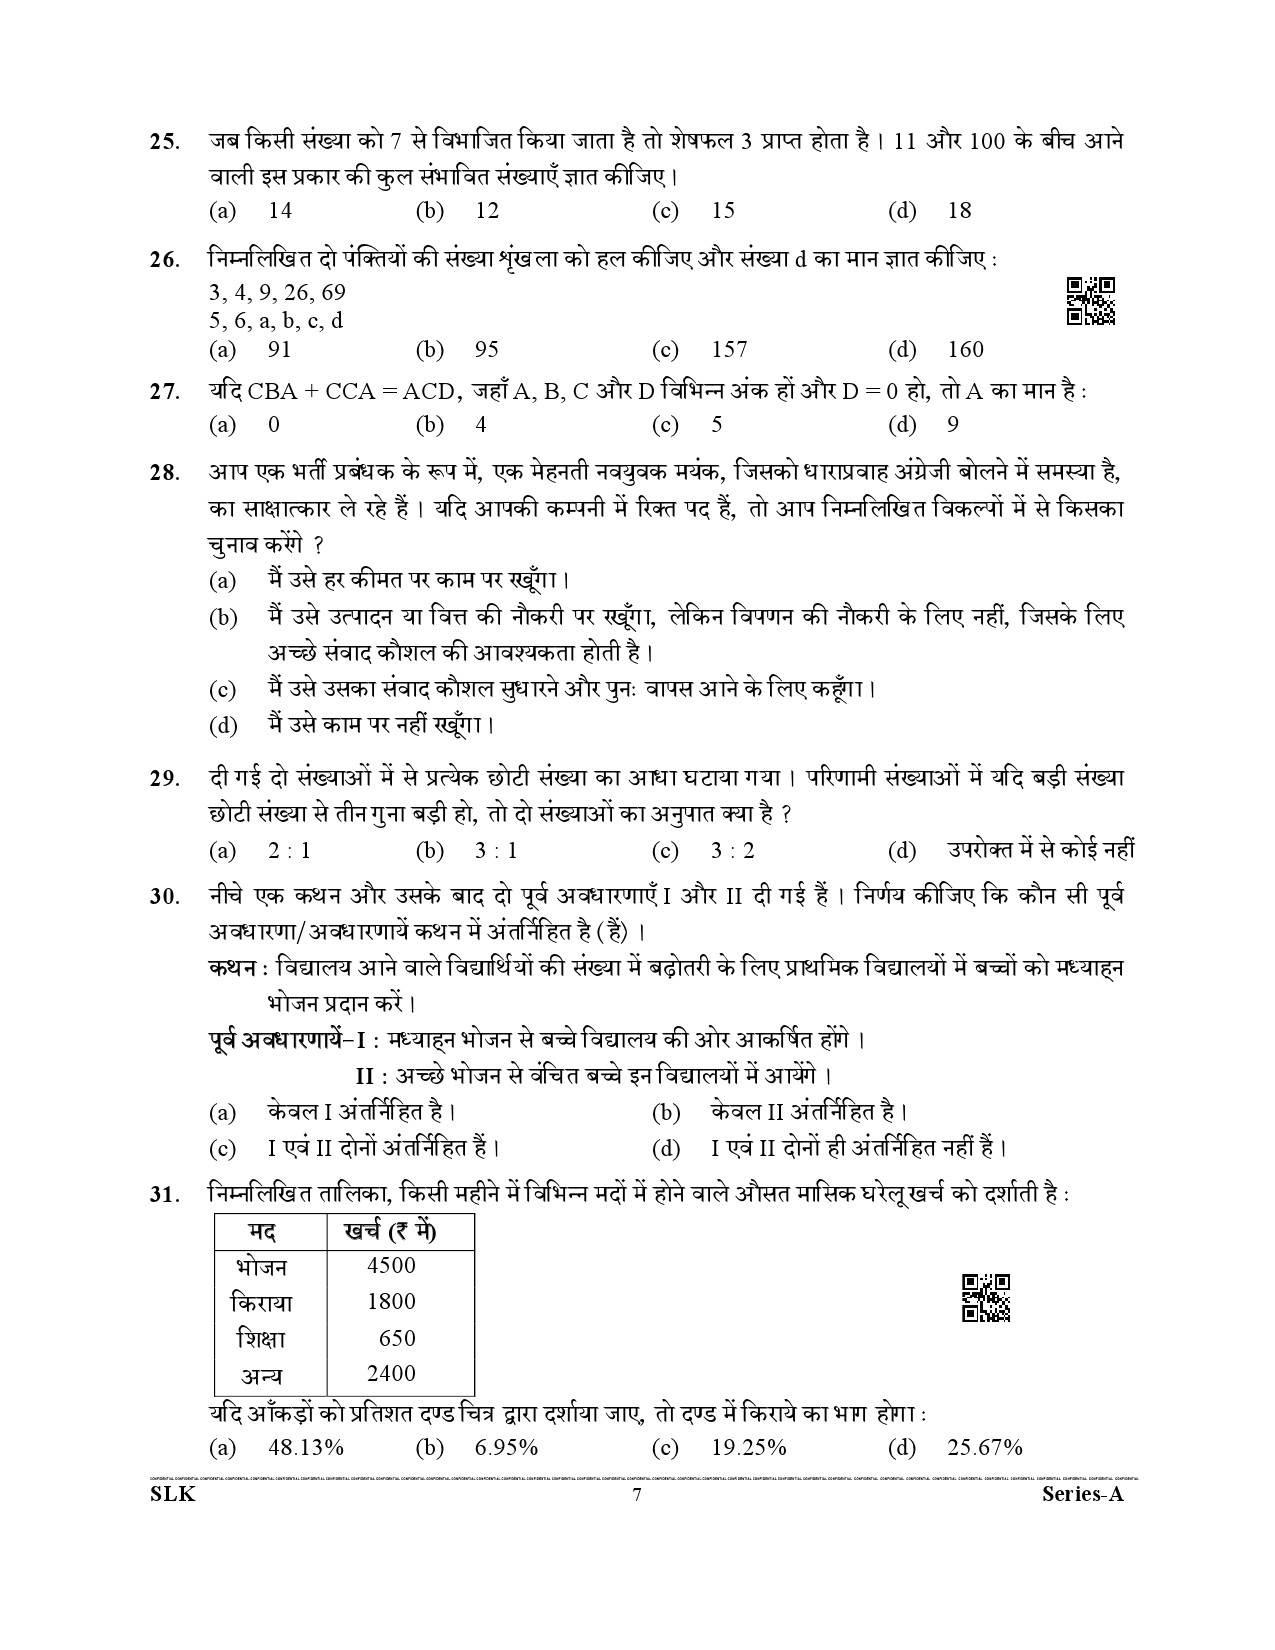 Uttarakhand Combined State Upper Subordinate Services Pre Exam 2021 Paper II 7